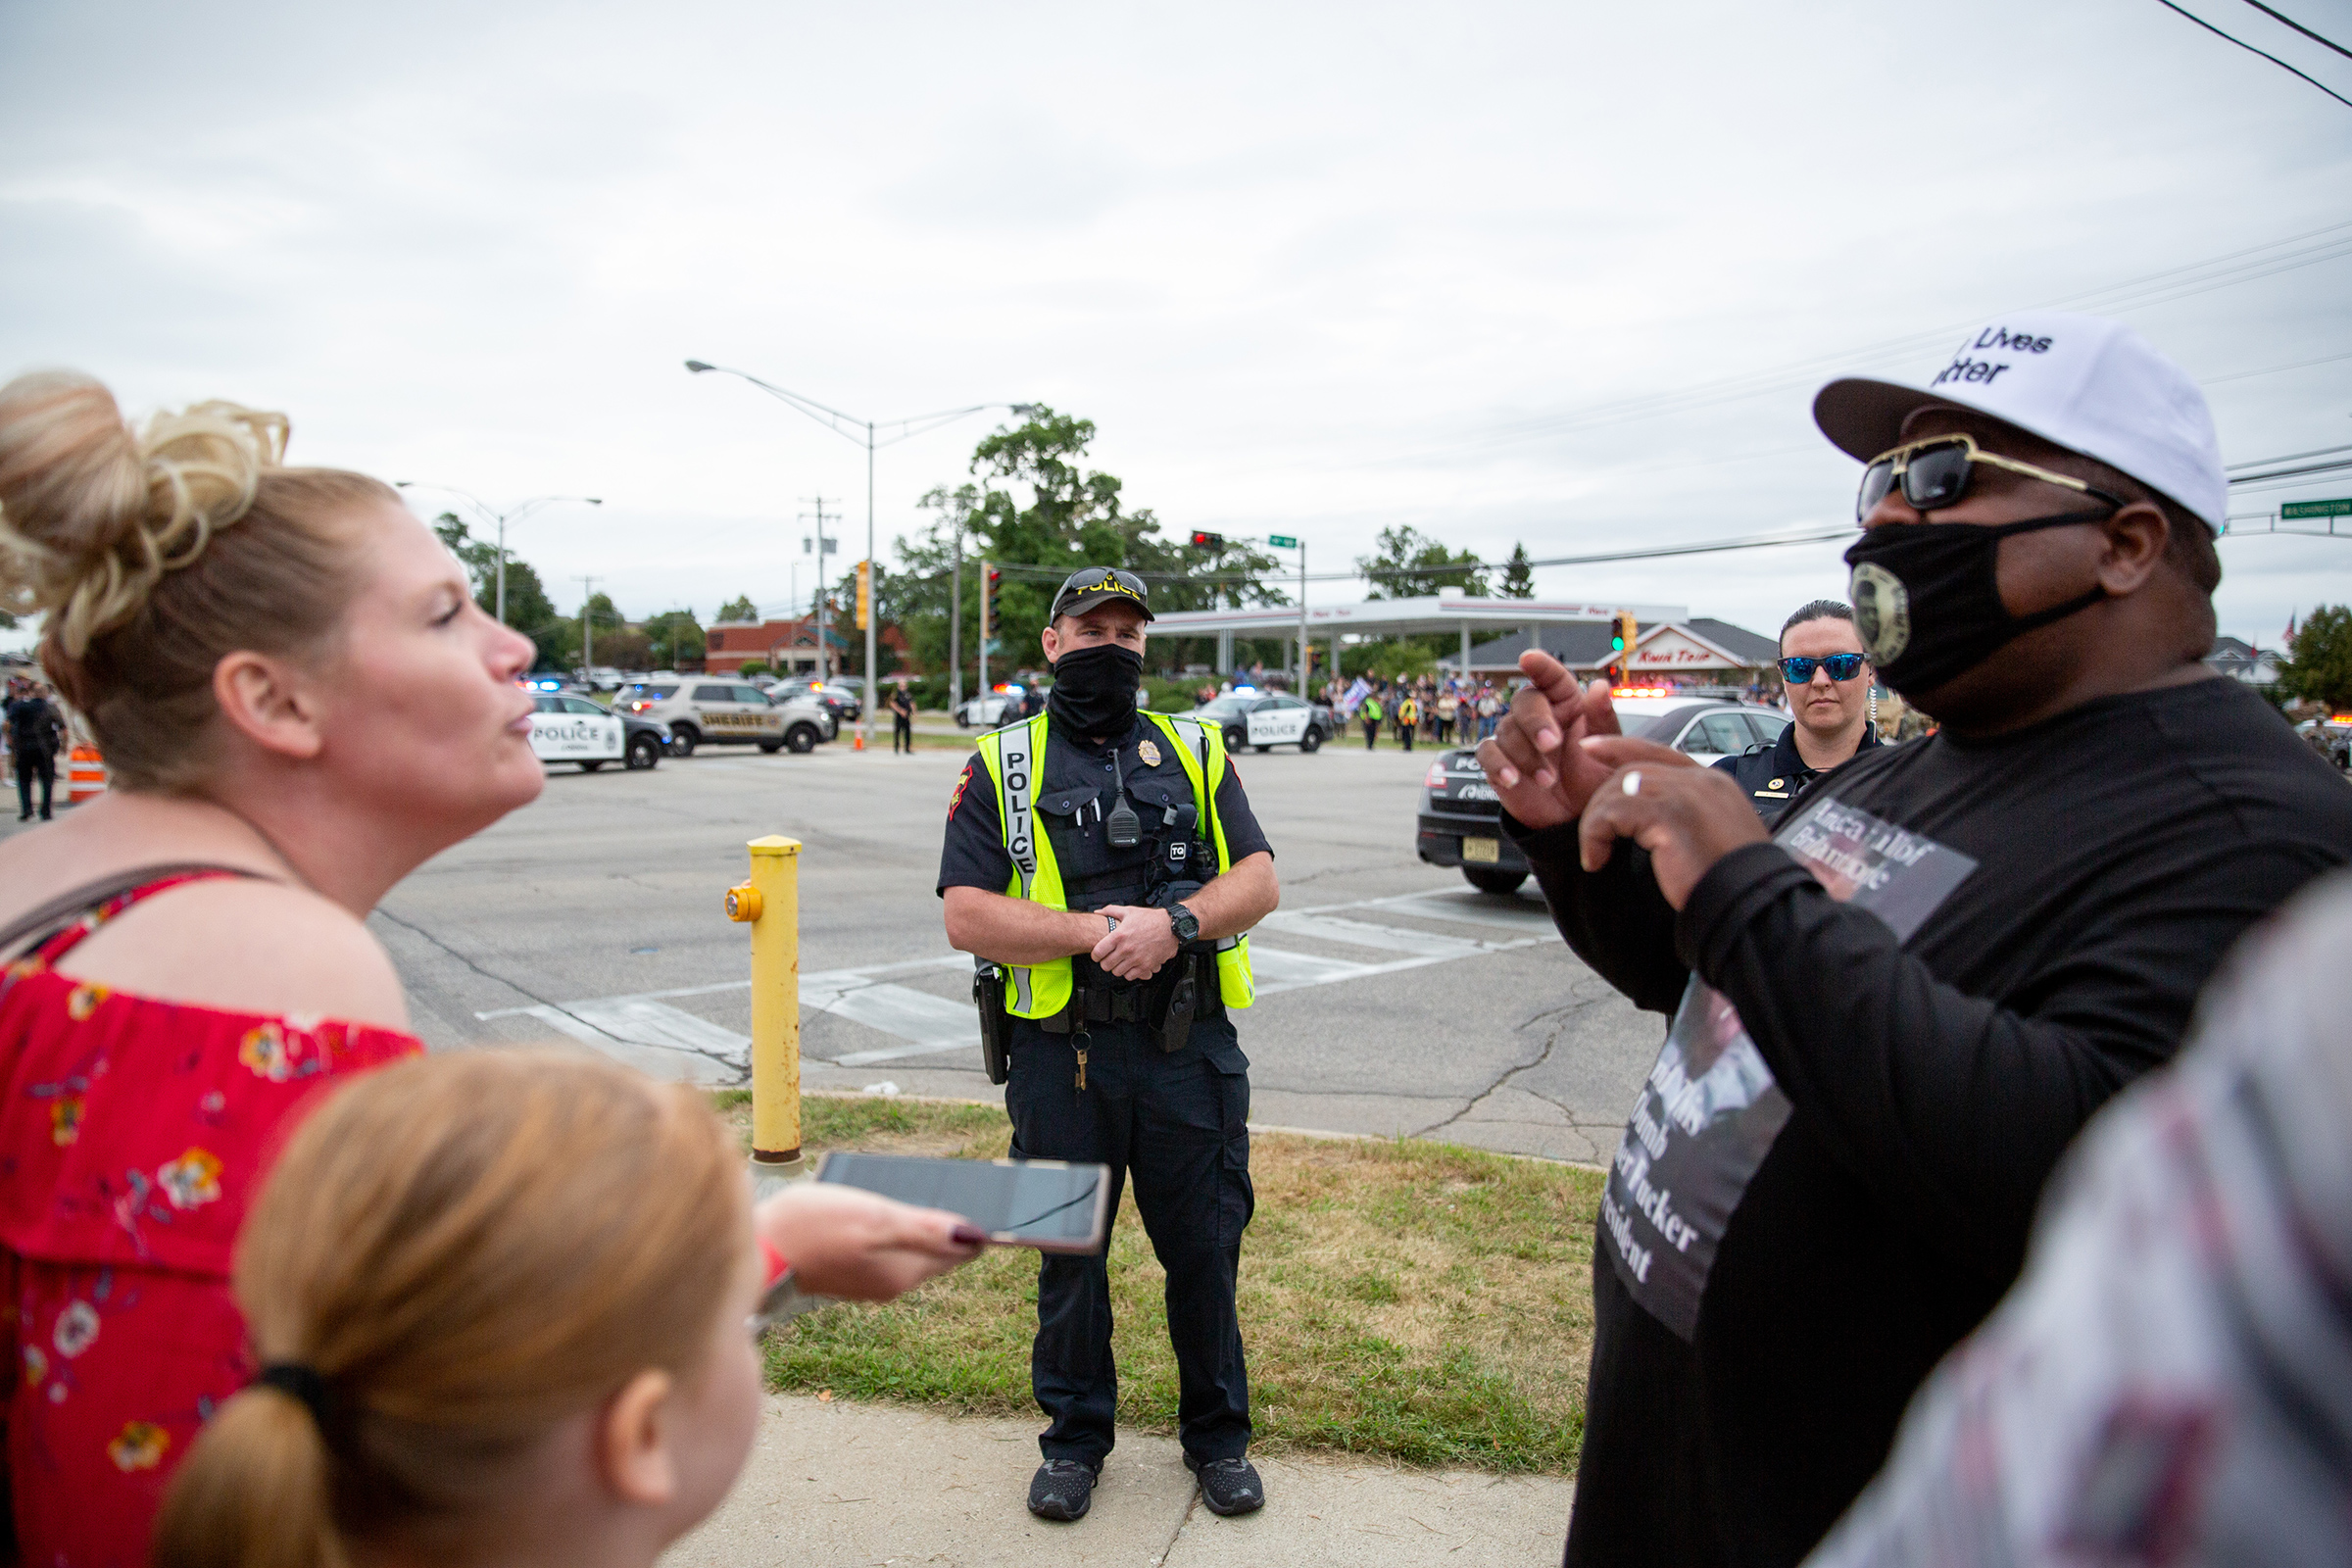 A confrontation during the President’s visit to Kenosha, Wis., on Sept. 1 (Patience Zalanga for TIME)